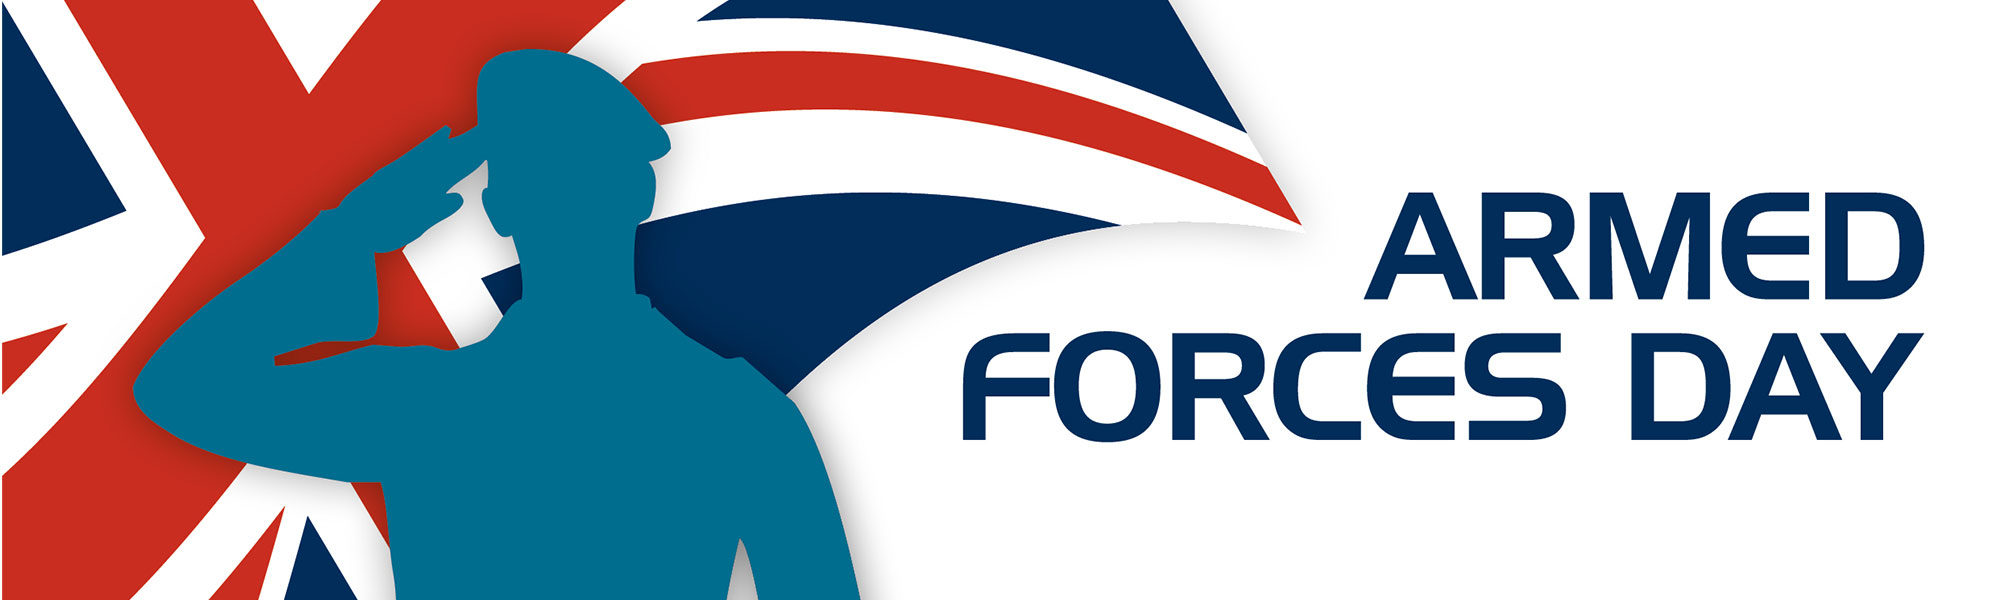 Armed Forces Day 2020